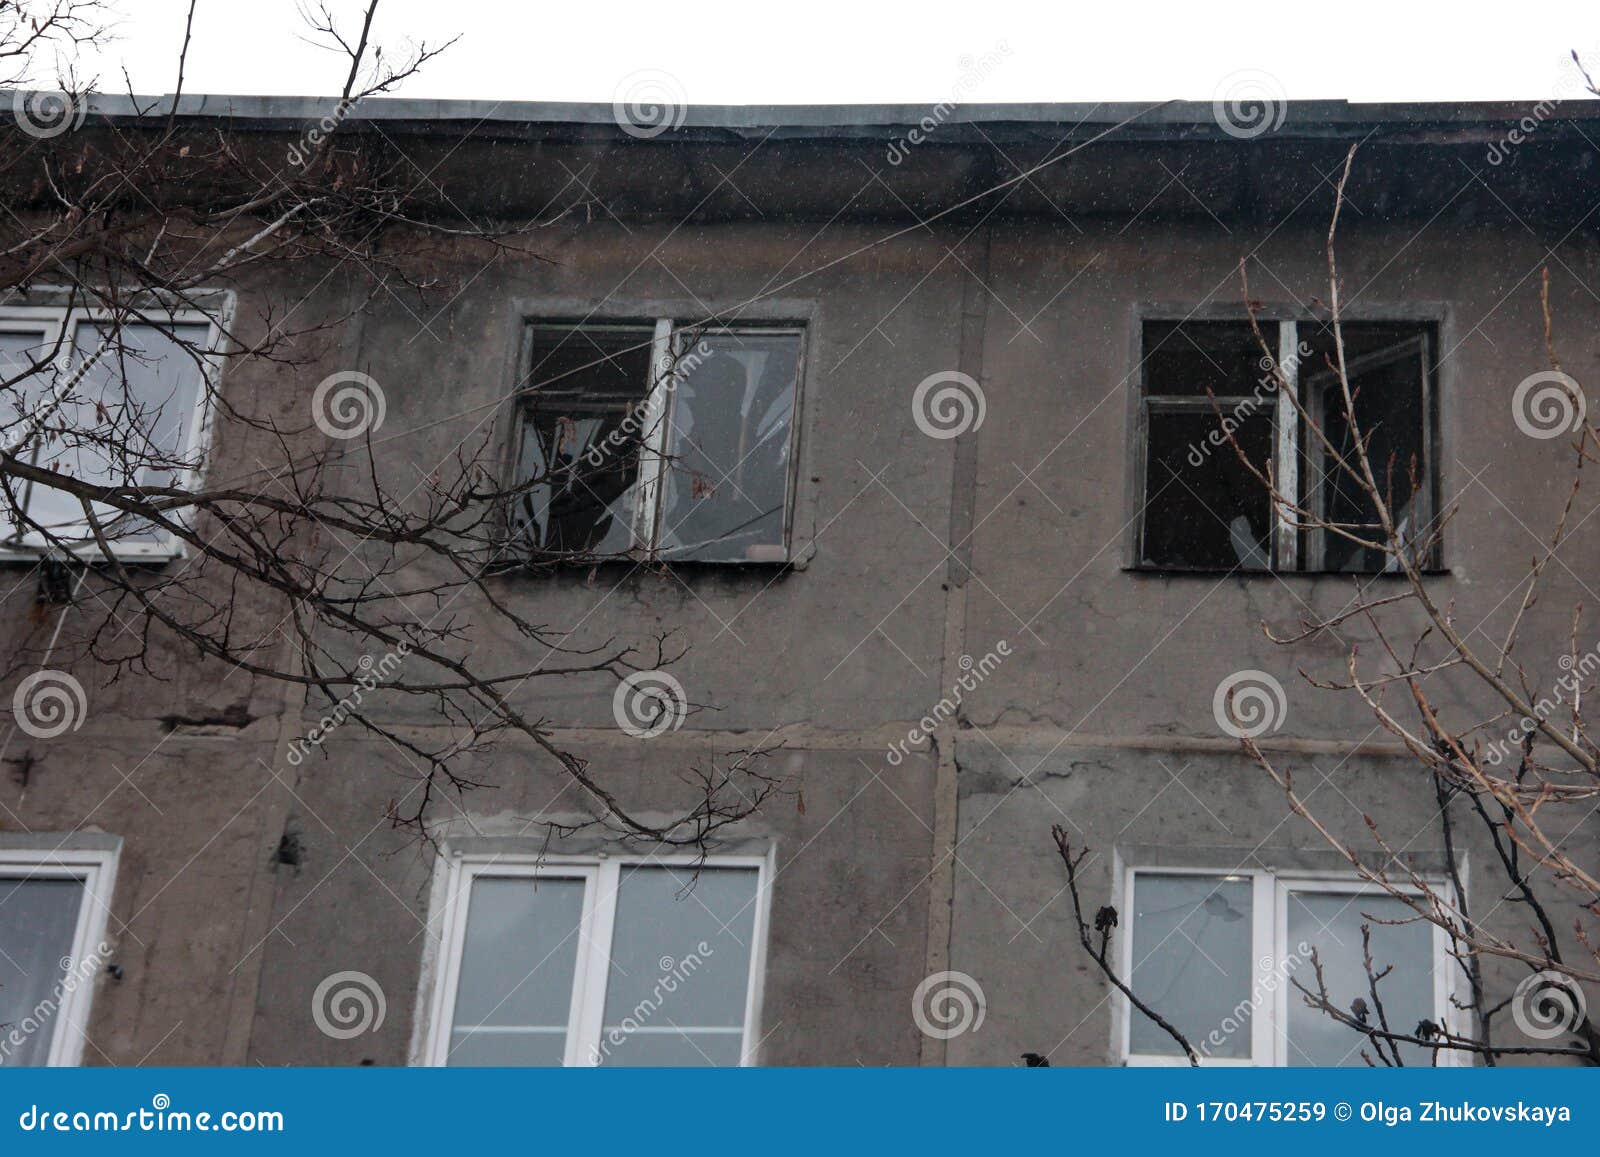 destruction from shelling in the donbas. broken housing